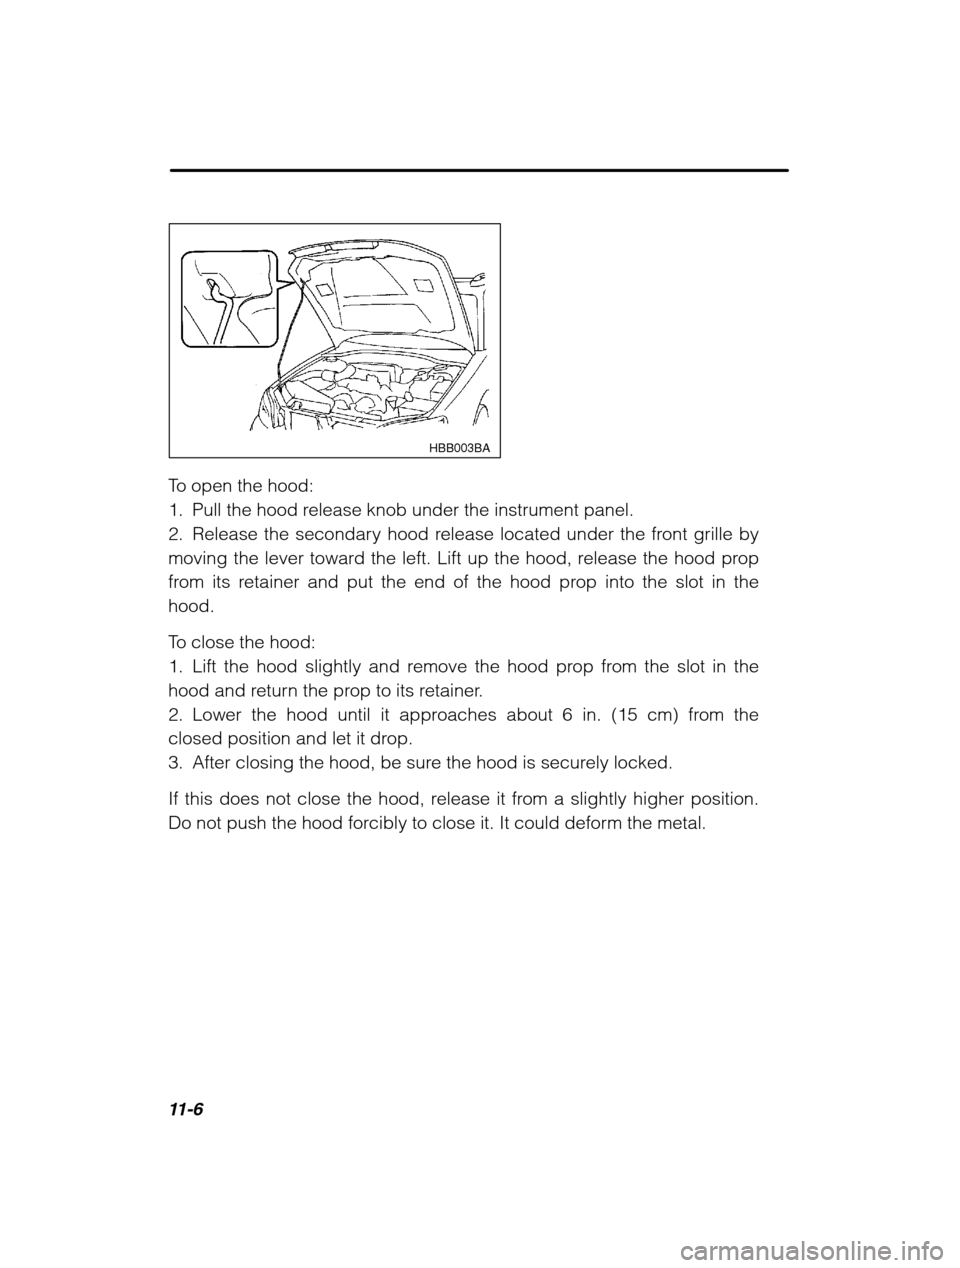 SUBARU OUTBACK 2002 3.G Owners Manual 11-6
HBB003BA
To open the hood: 
1. Pull the hood release knob under the instrument panel.
2. Release the secondary hood release located under the front grille by
moving the lever toward the left. Lif